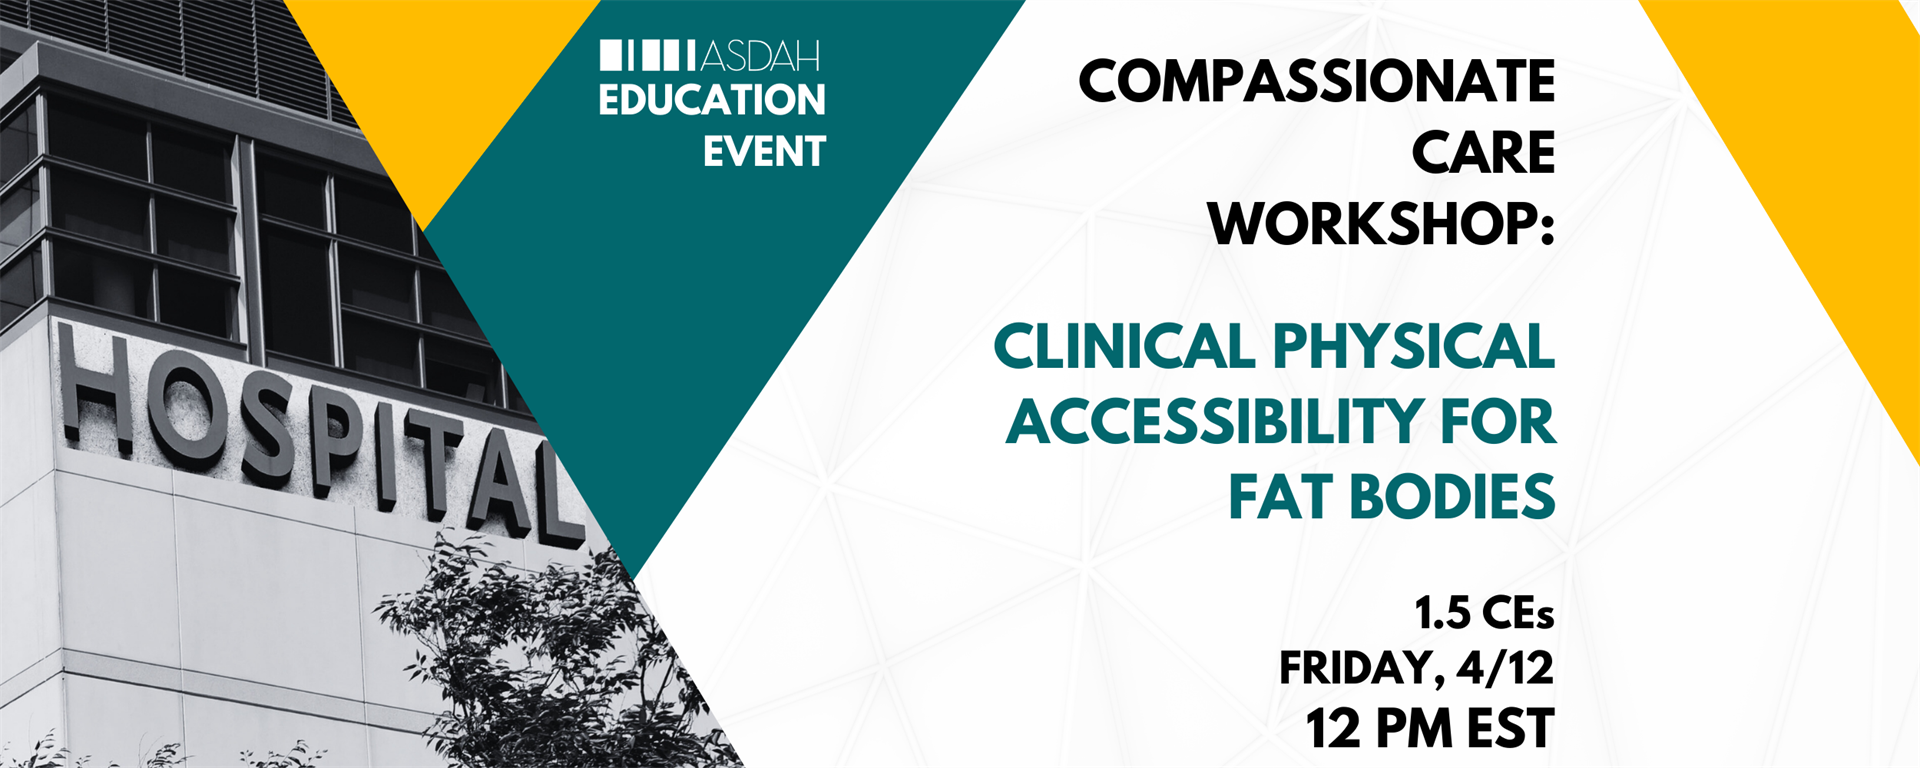 Graphic with black and white picture of Hospital signage and windows on the left hand side. White background with yellow and teal elements, black and teal text. Text reads: Education event. Compassionate Care Workshop: Clinical Physical Accessibility for Fat Bodies 1.5 CEs Friday, 4/12 pm EST